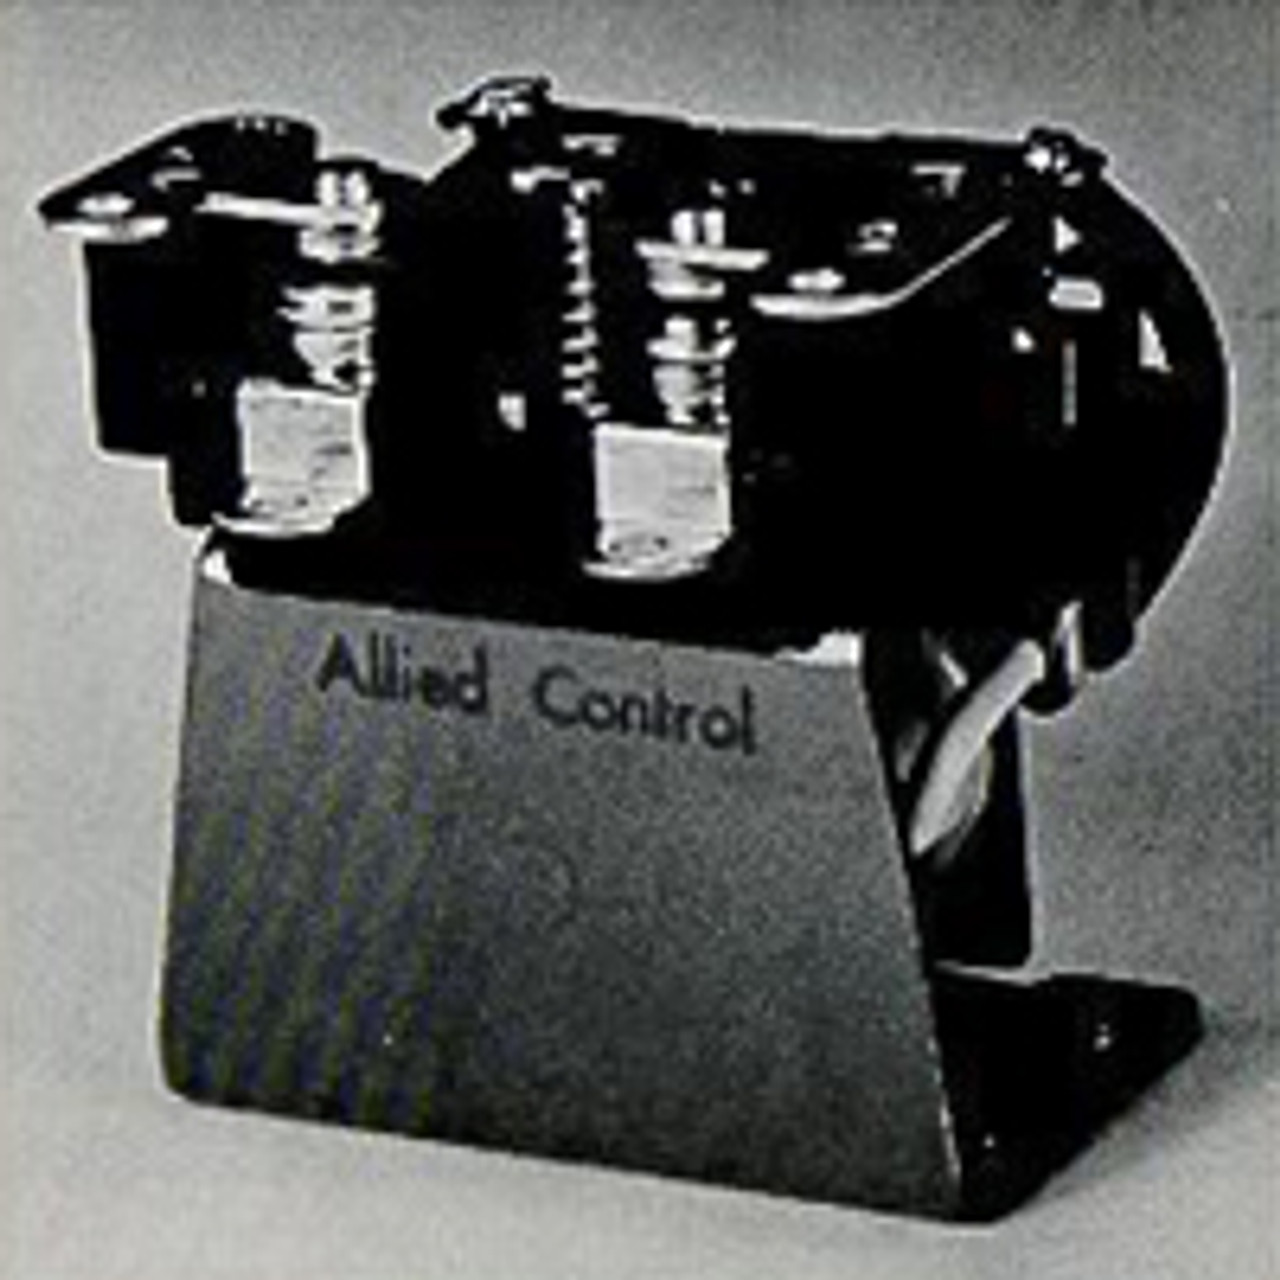 Allied Controls BOT-6D-26.5VDC Power Relays